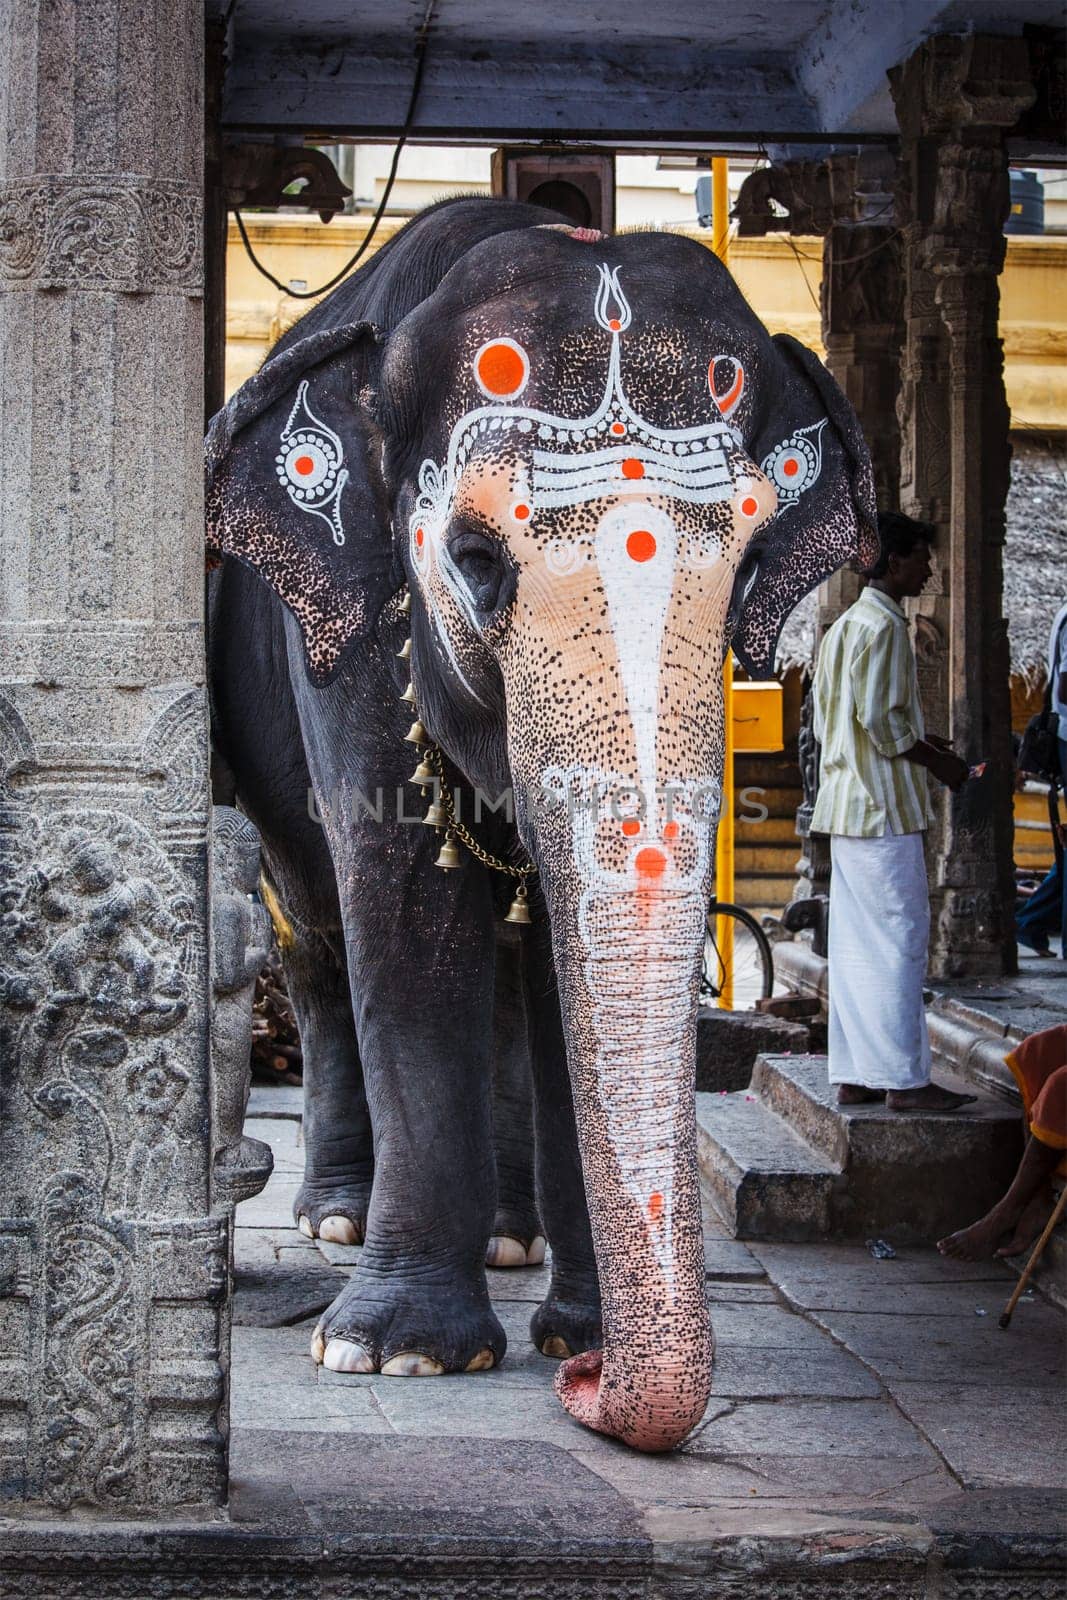 KANCHIPURAM, INDIA - SEPTEMBER 12, 2009: Elephant in Kailasanthar temple. Temple elephants are vital part of many temple ceremonies and festivals, particularly in South India